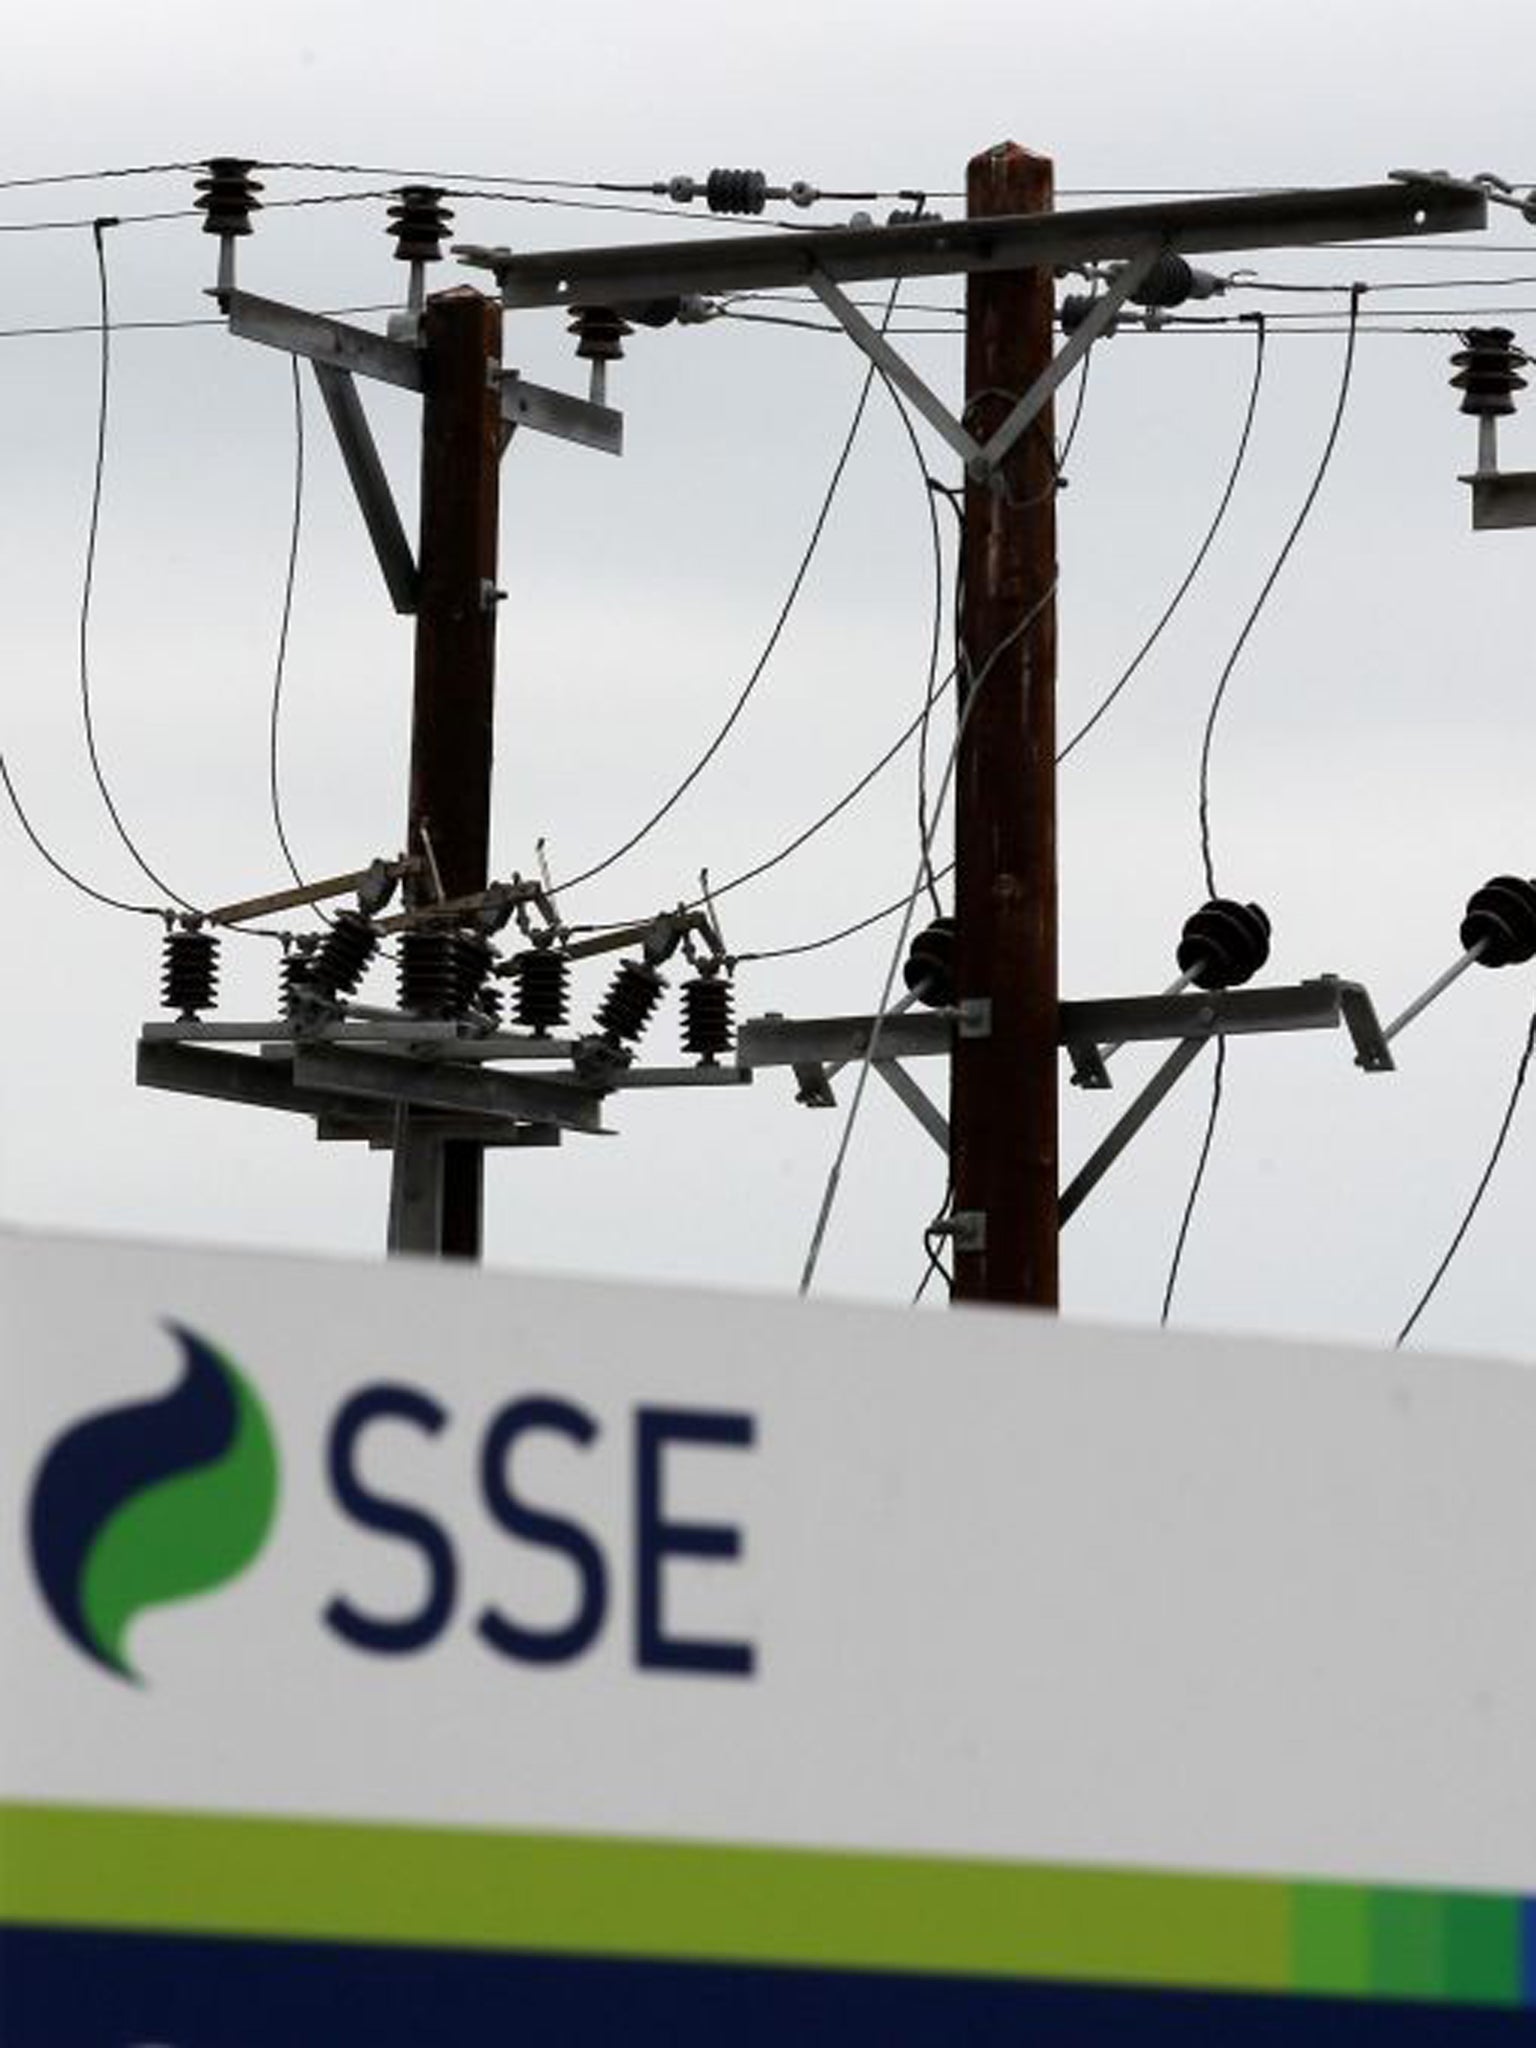 Utility giant SSE made £410.1 million in the 12 months to March